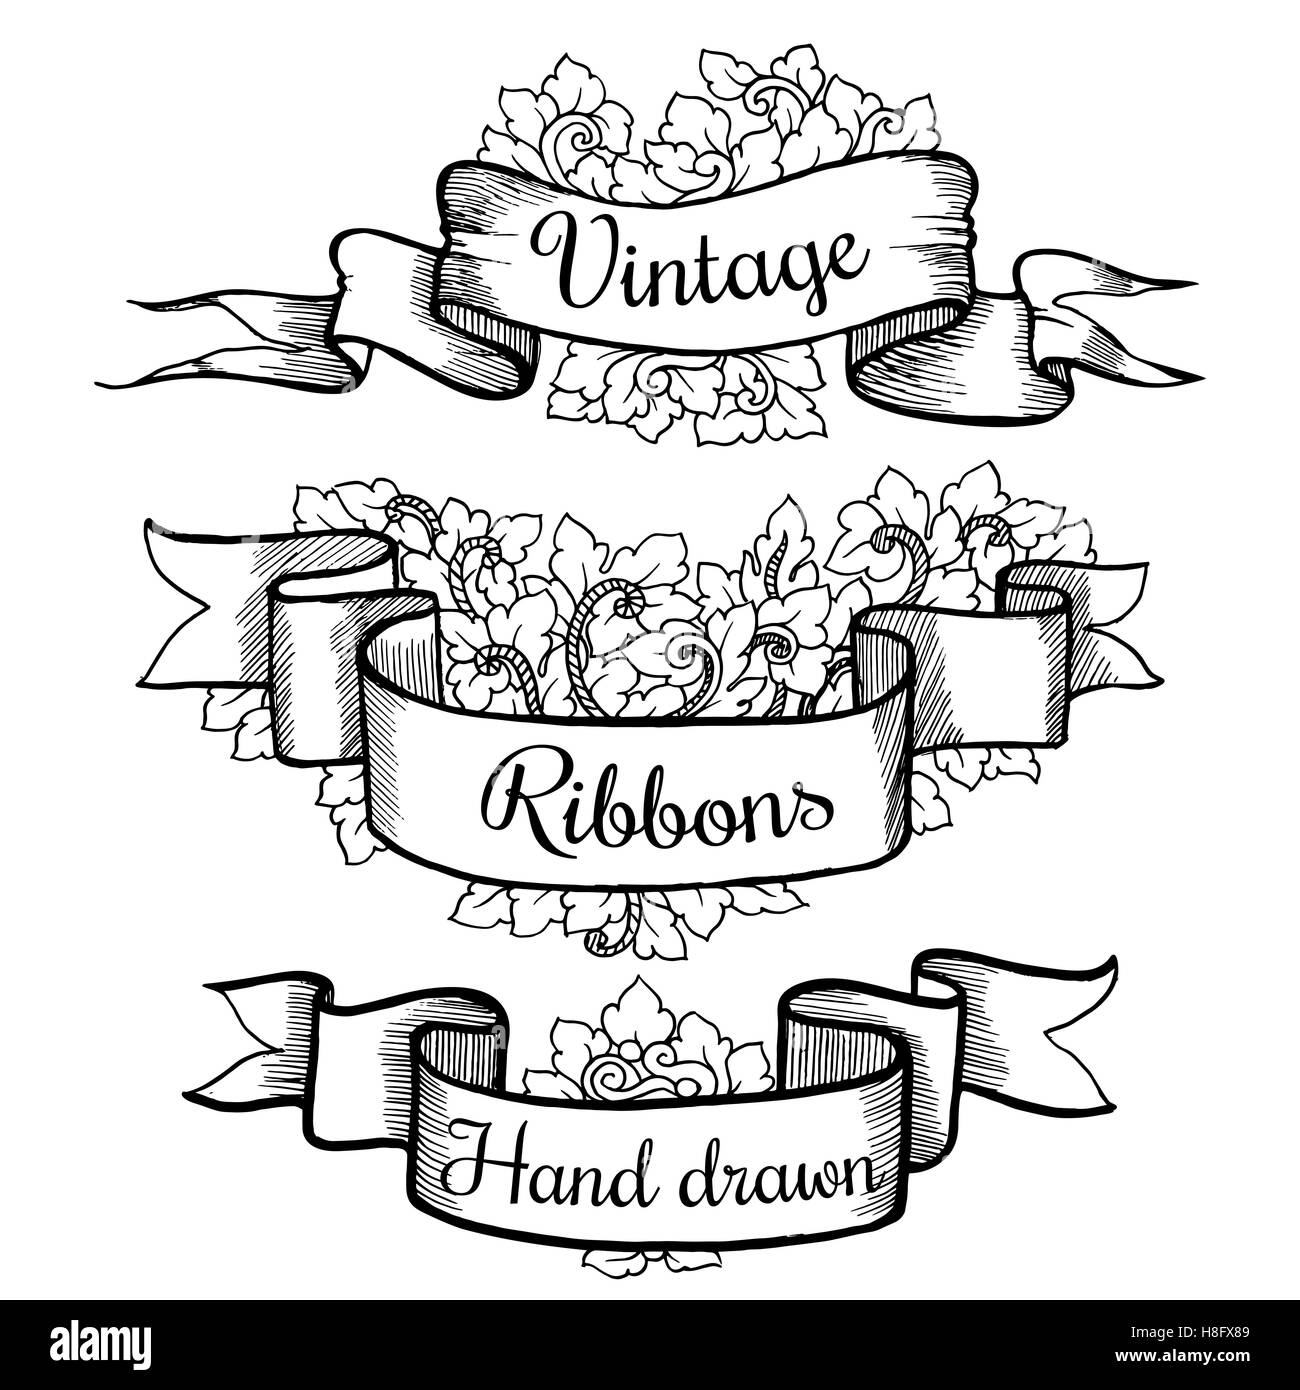 Collection of vintage ribbons. Hand drawn graphic illustrations